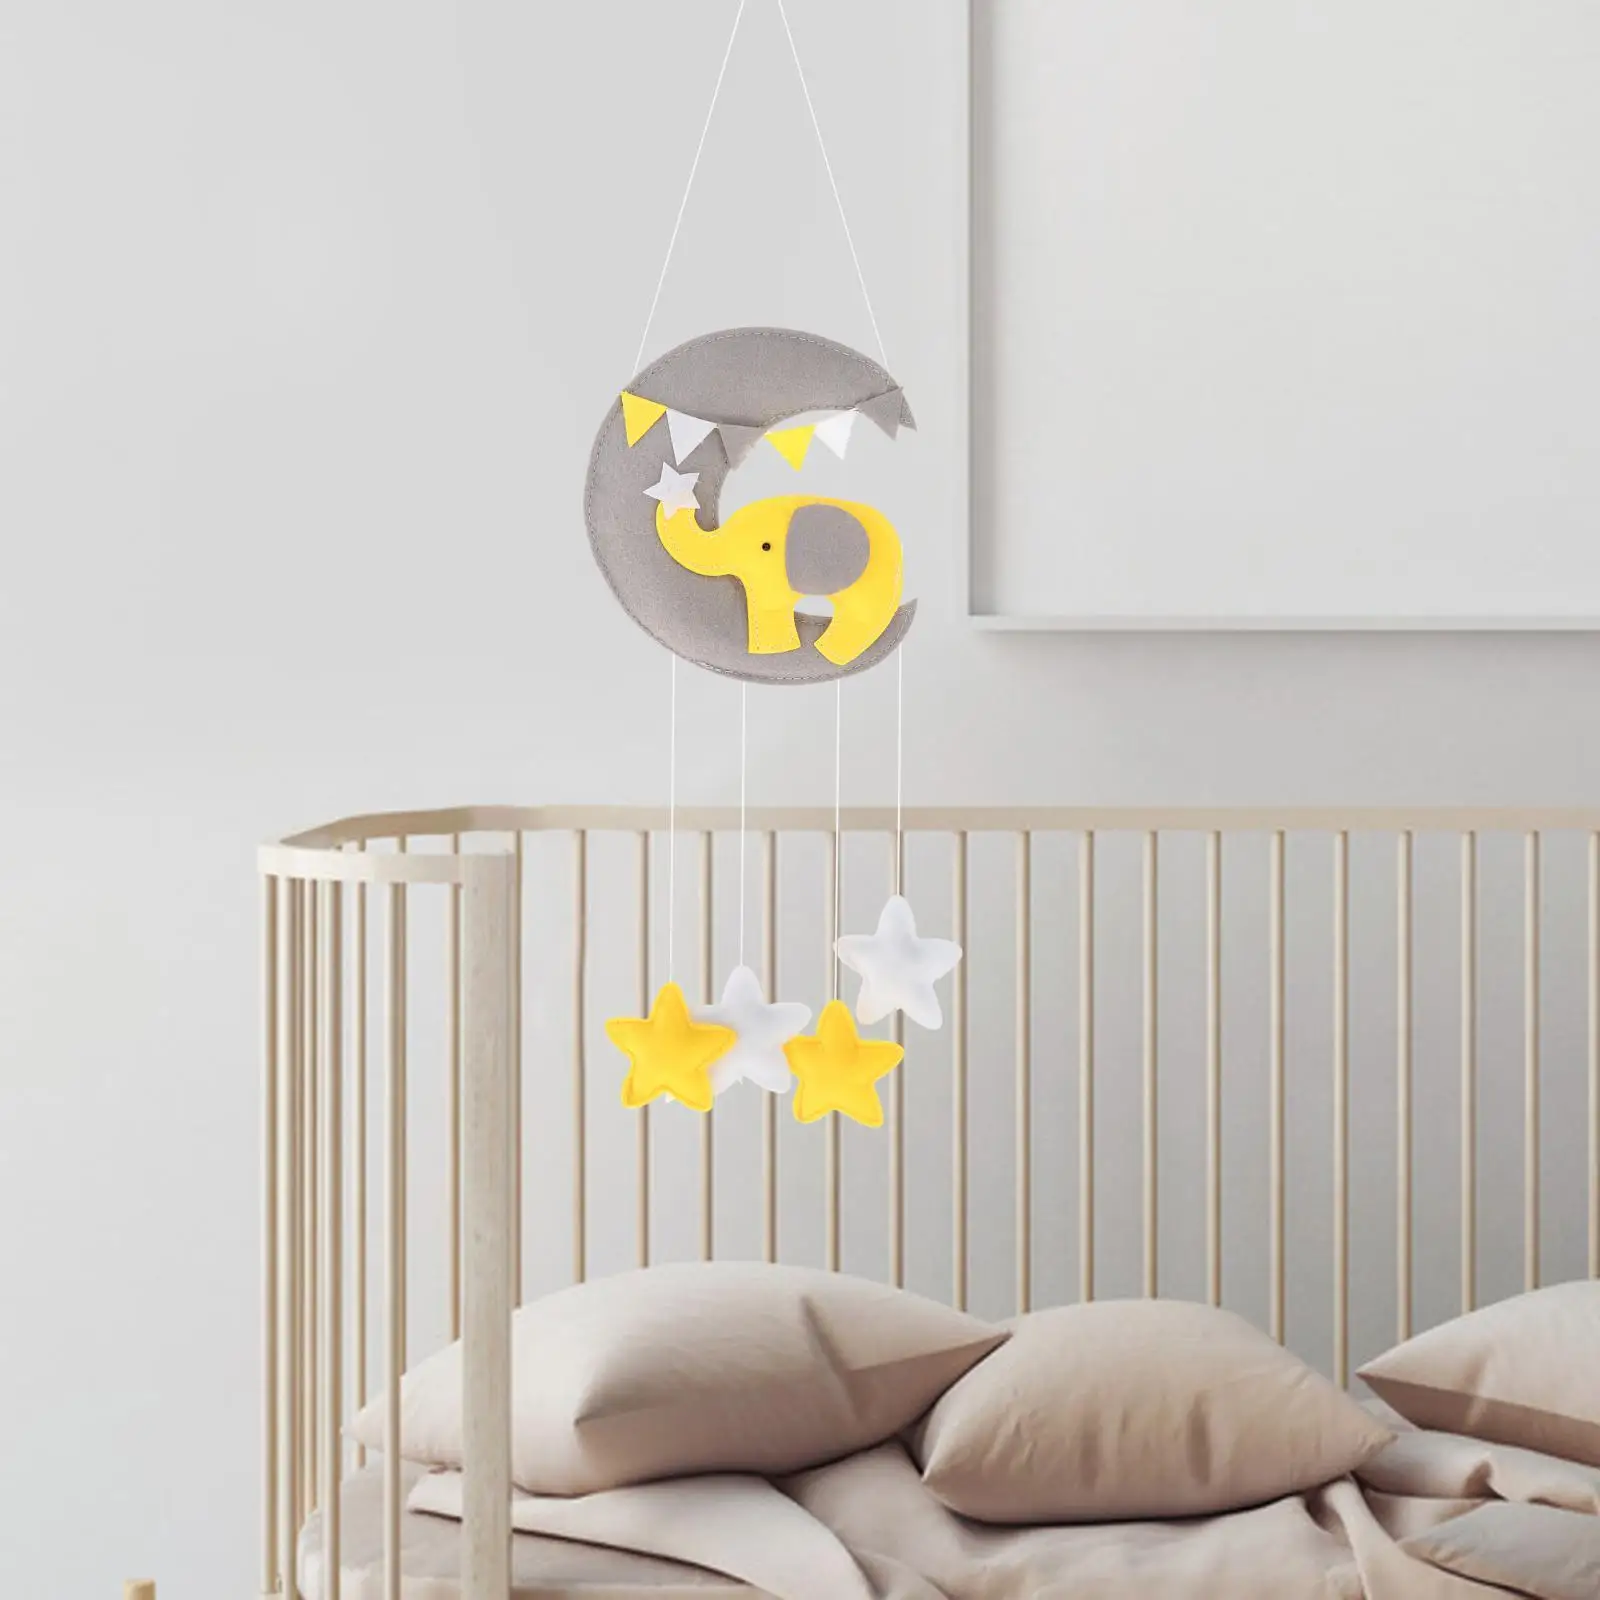 Infant Baby Mobile Hanging Baby Crib Rattles Crib Toys Nursery Toys Bed Bell Toy for Newborn Toddlers Kids Girls Birthday Gifts